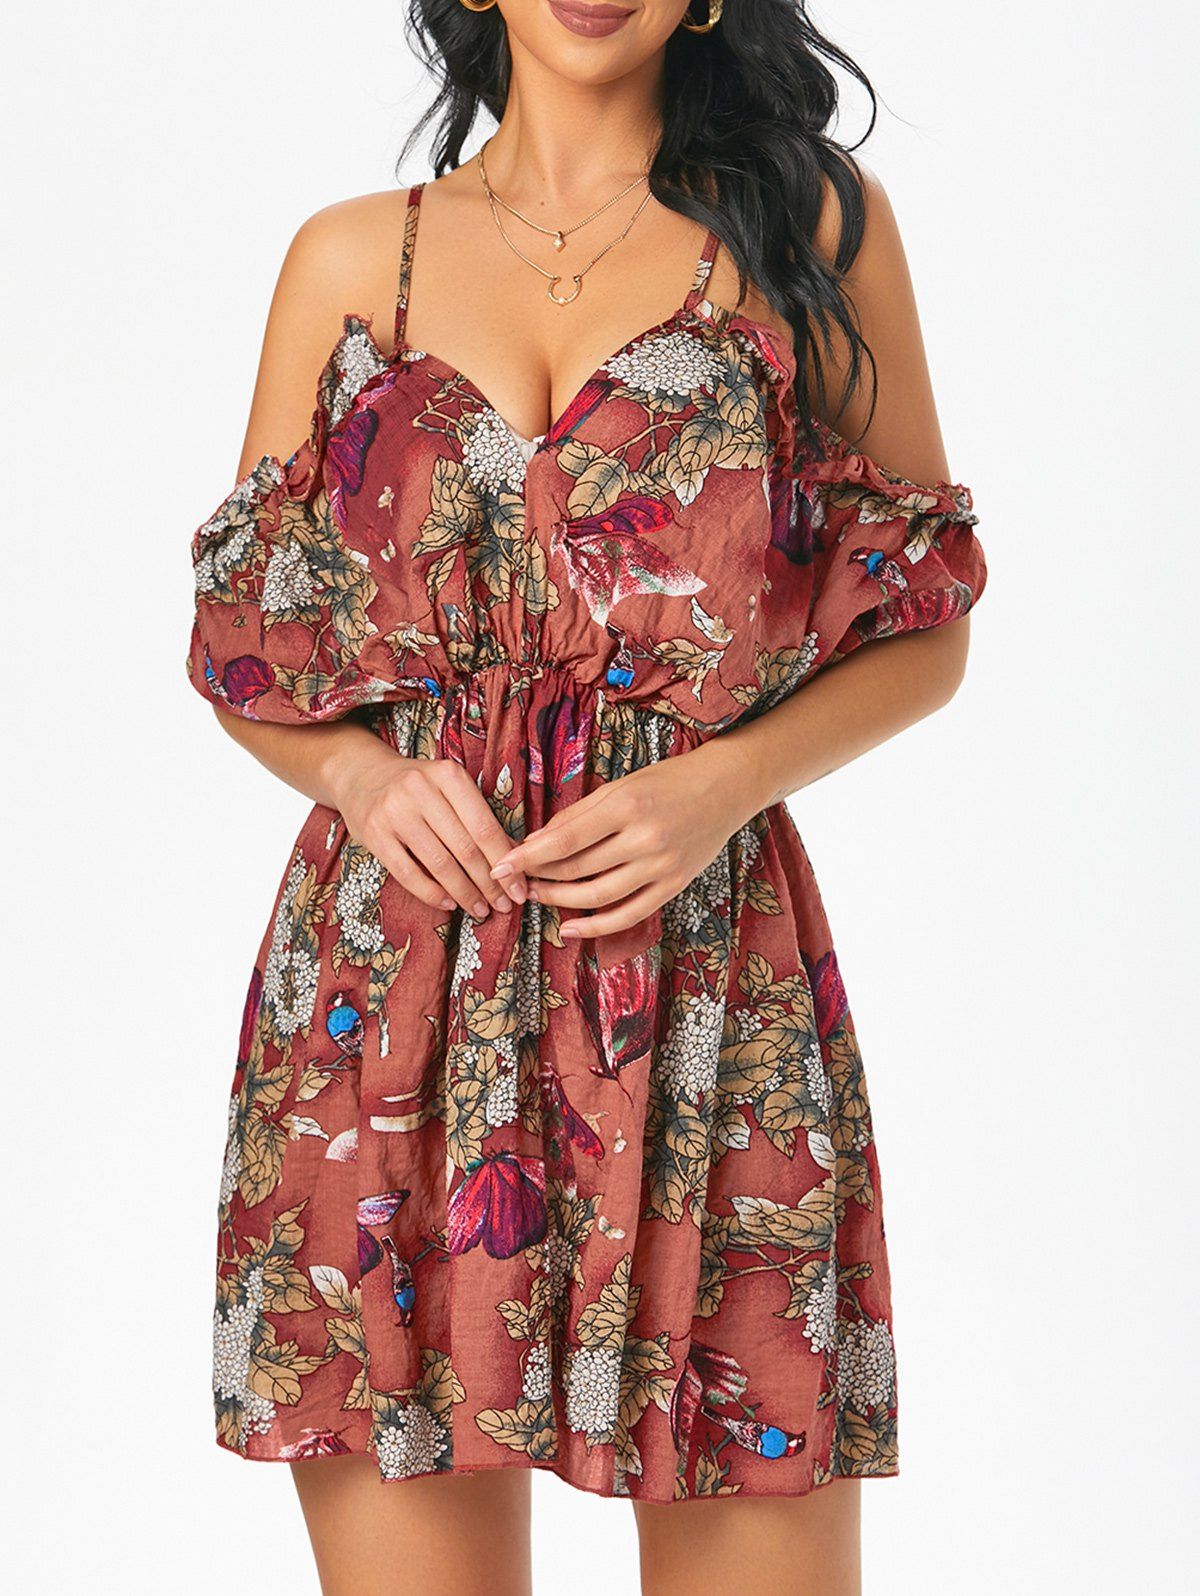 Floral Butterfly Print Vacation Dress Cold Shoulder Ruffled Mini Dress Plunging Neck Spaghetti Strap Dress - DEEP RED L